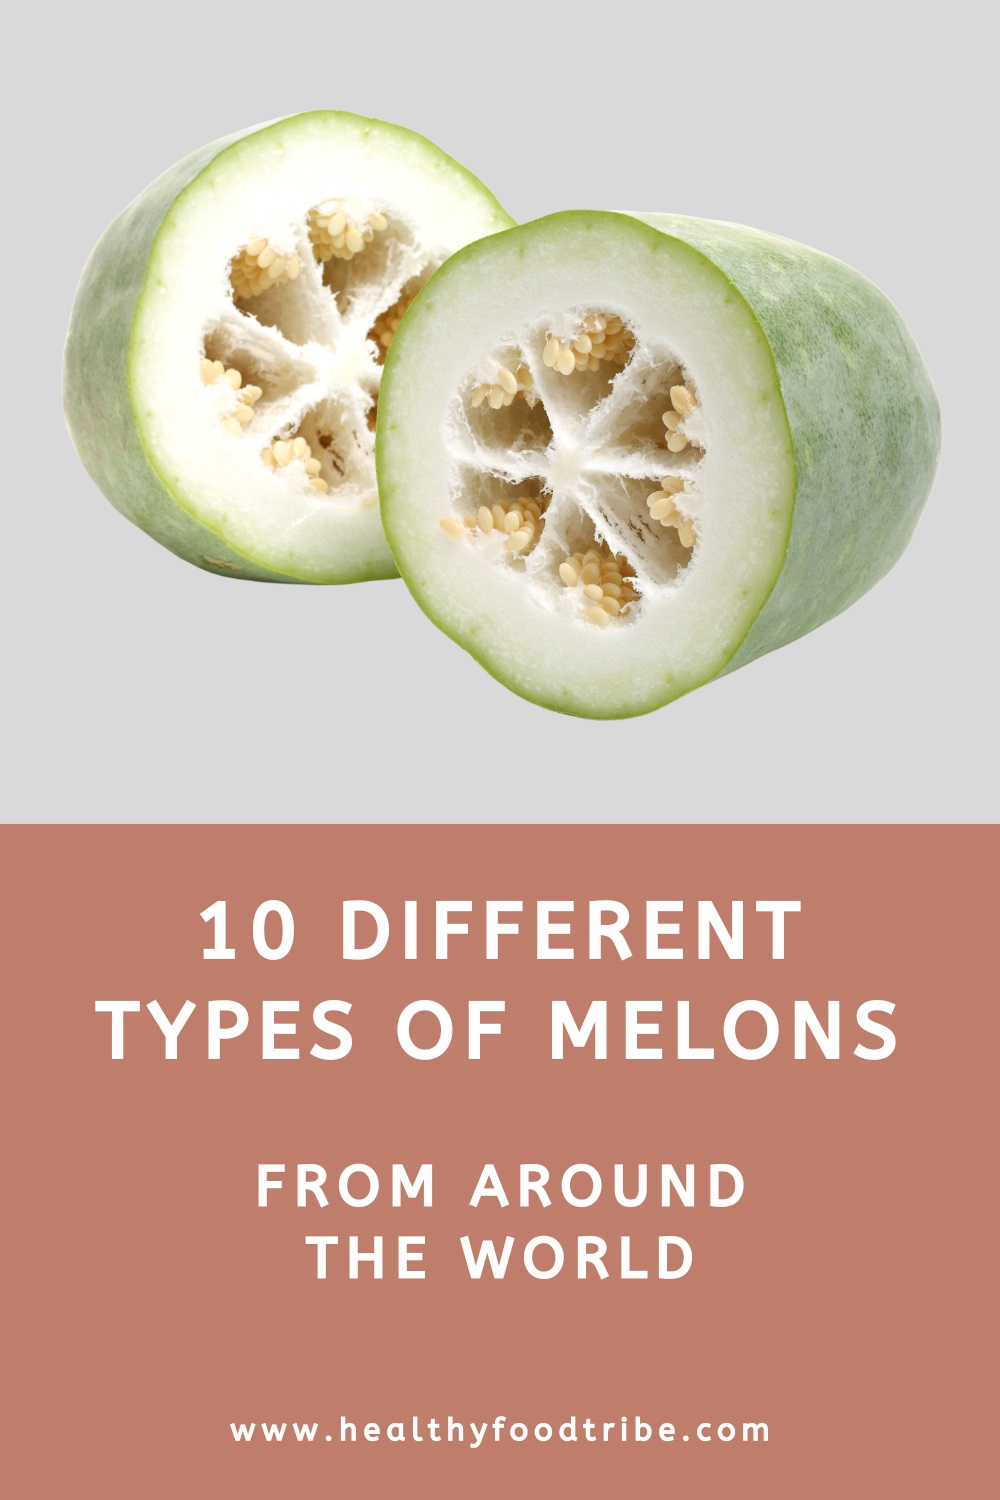 10 Different types of melons from around the world